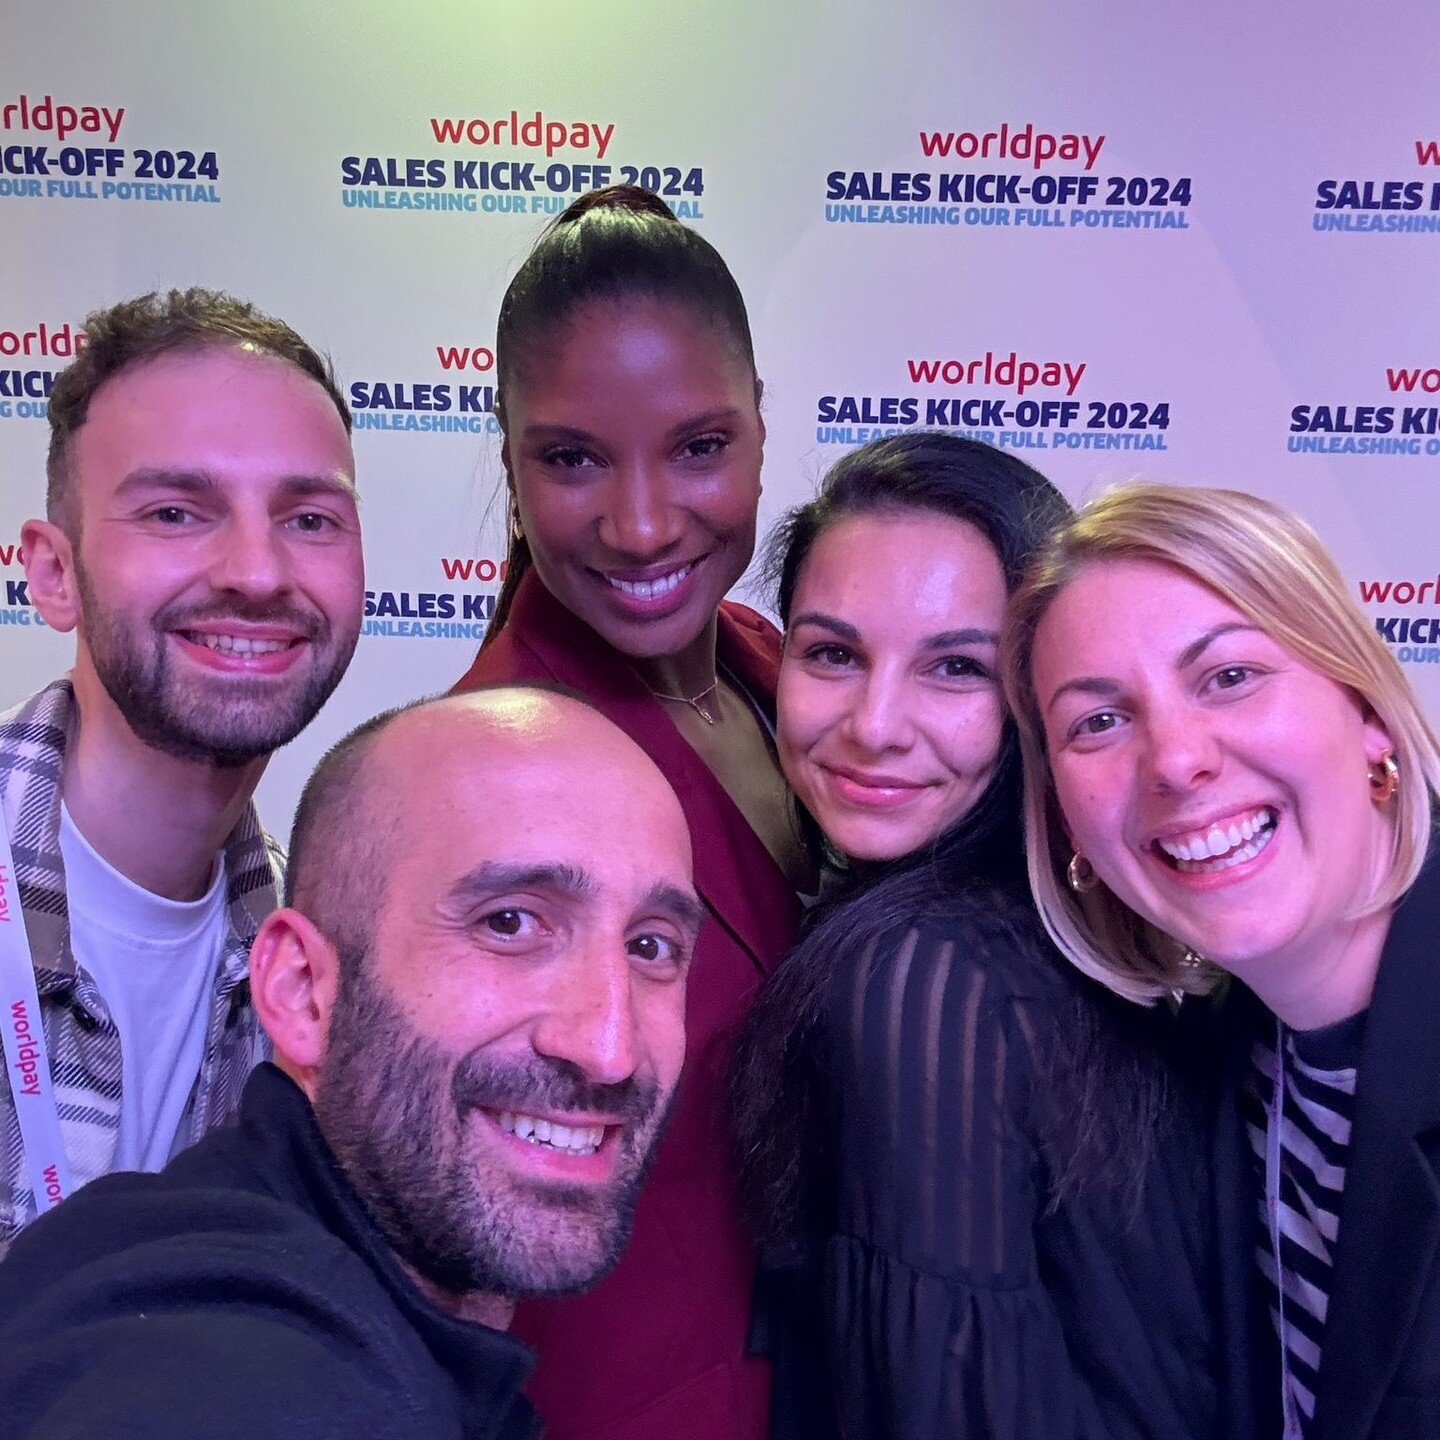 Meeting Sporting Legend Dame Denise Lewis at worldpay's SKO 2024 - So great to be involved.